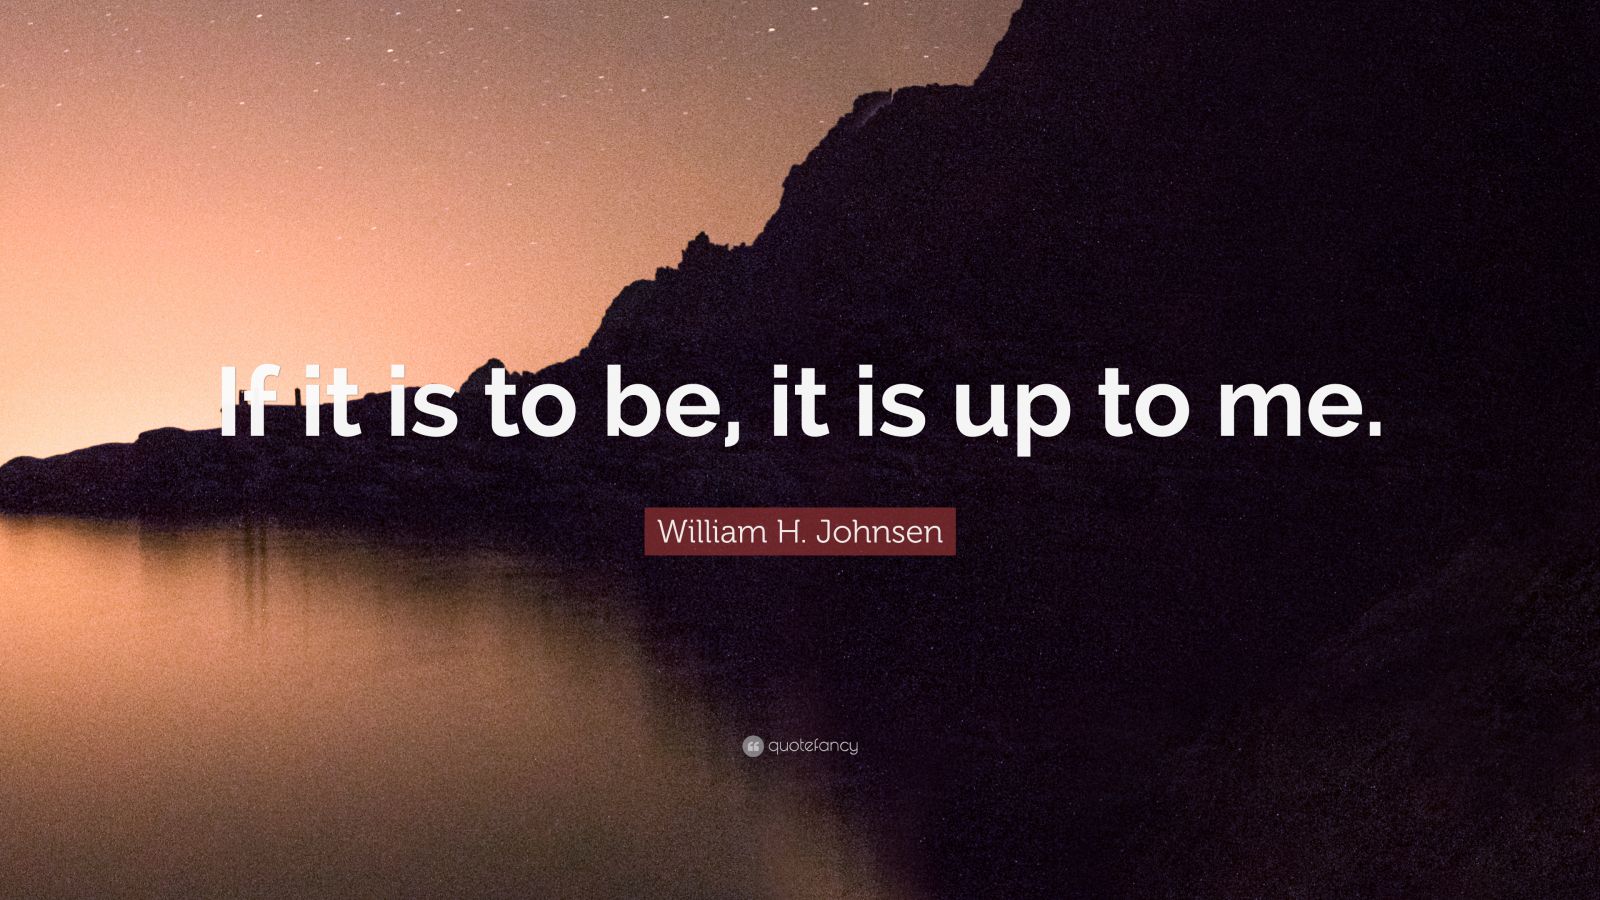 William H. Johnsen Quote: “If it is to be, it is up to me.” (29